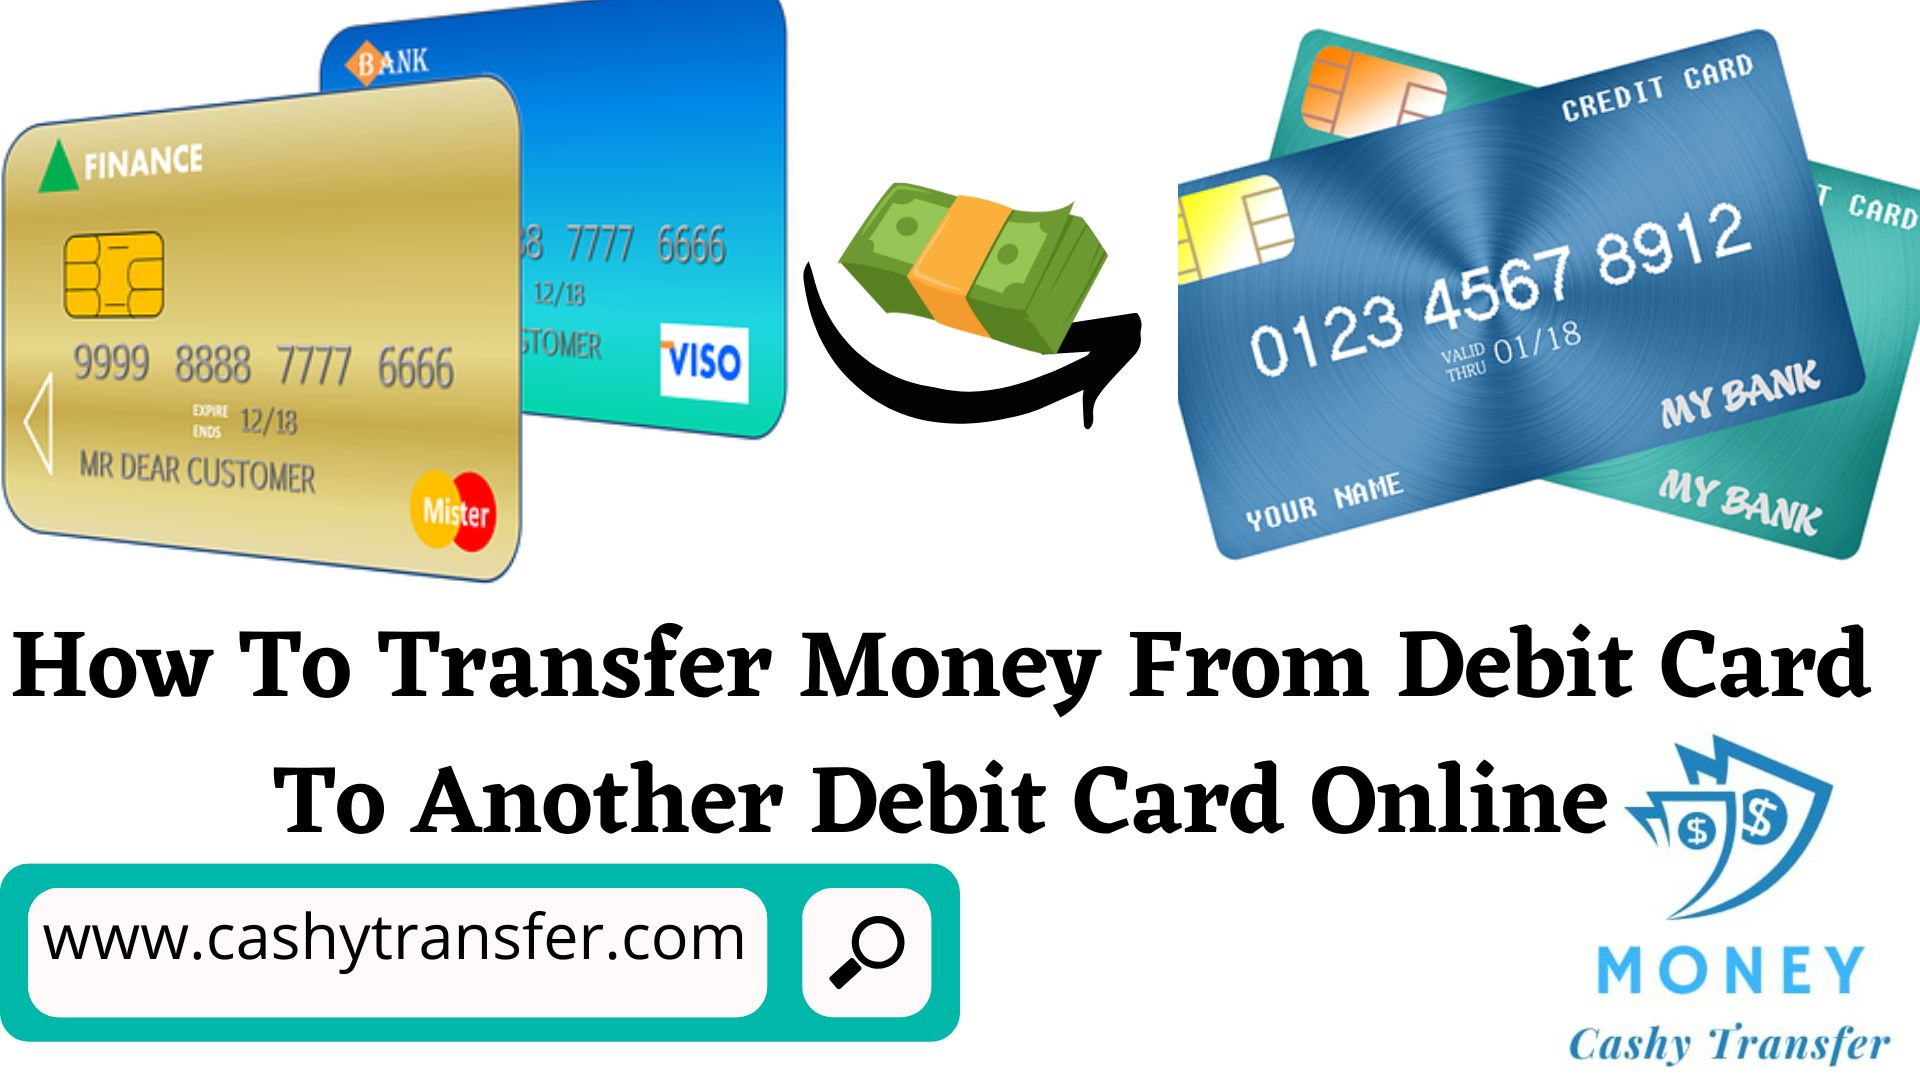 Transfer Money From Debit Card To Another Debit Card Online